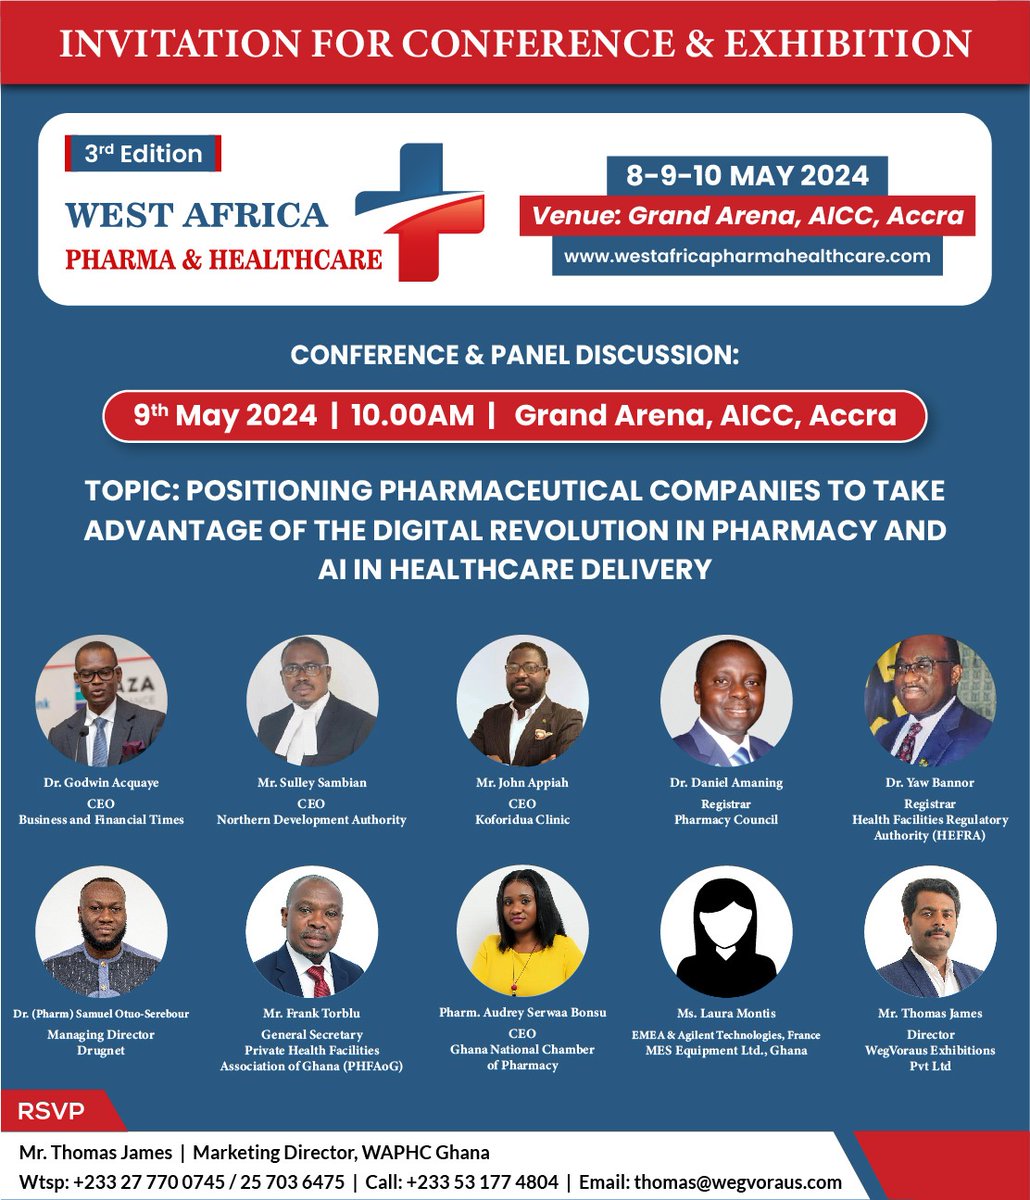 Come and engage with Dr. @acquaye_godwin and other esteemed speakers at the third edition of the ‘West Africa Pharma & Healthcare Conference & Exhibition’ in Accra, taking place at the Grand Arena, AICC from May 8 to May 10, 2024. 

#BFTOnline
#PharmaConference